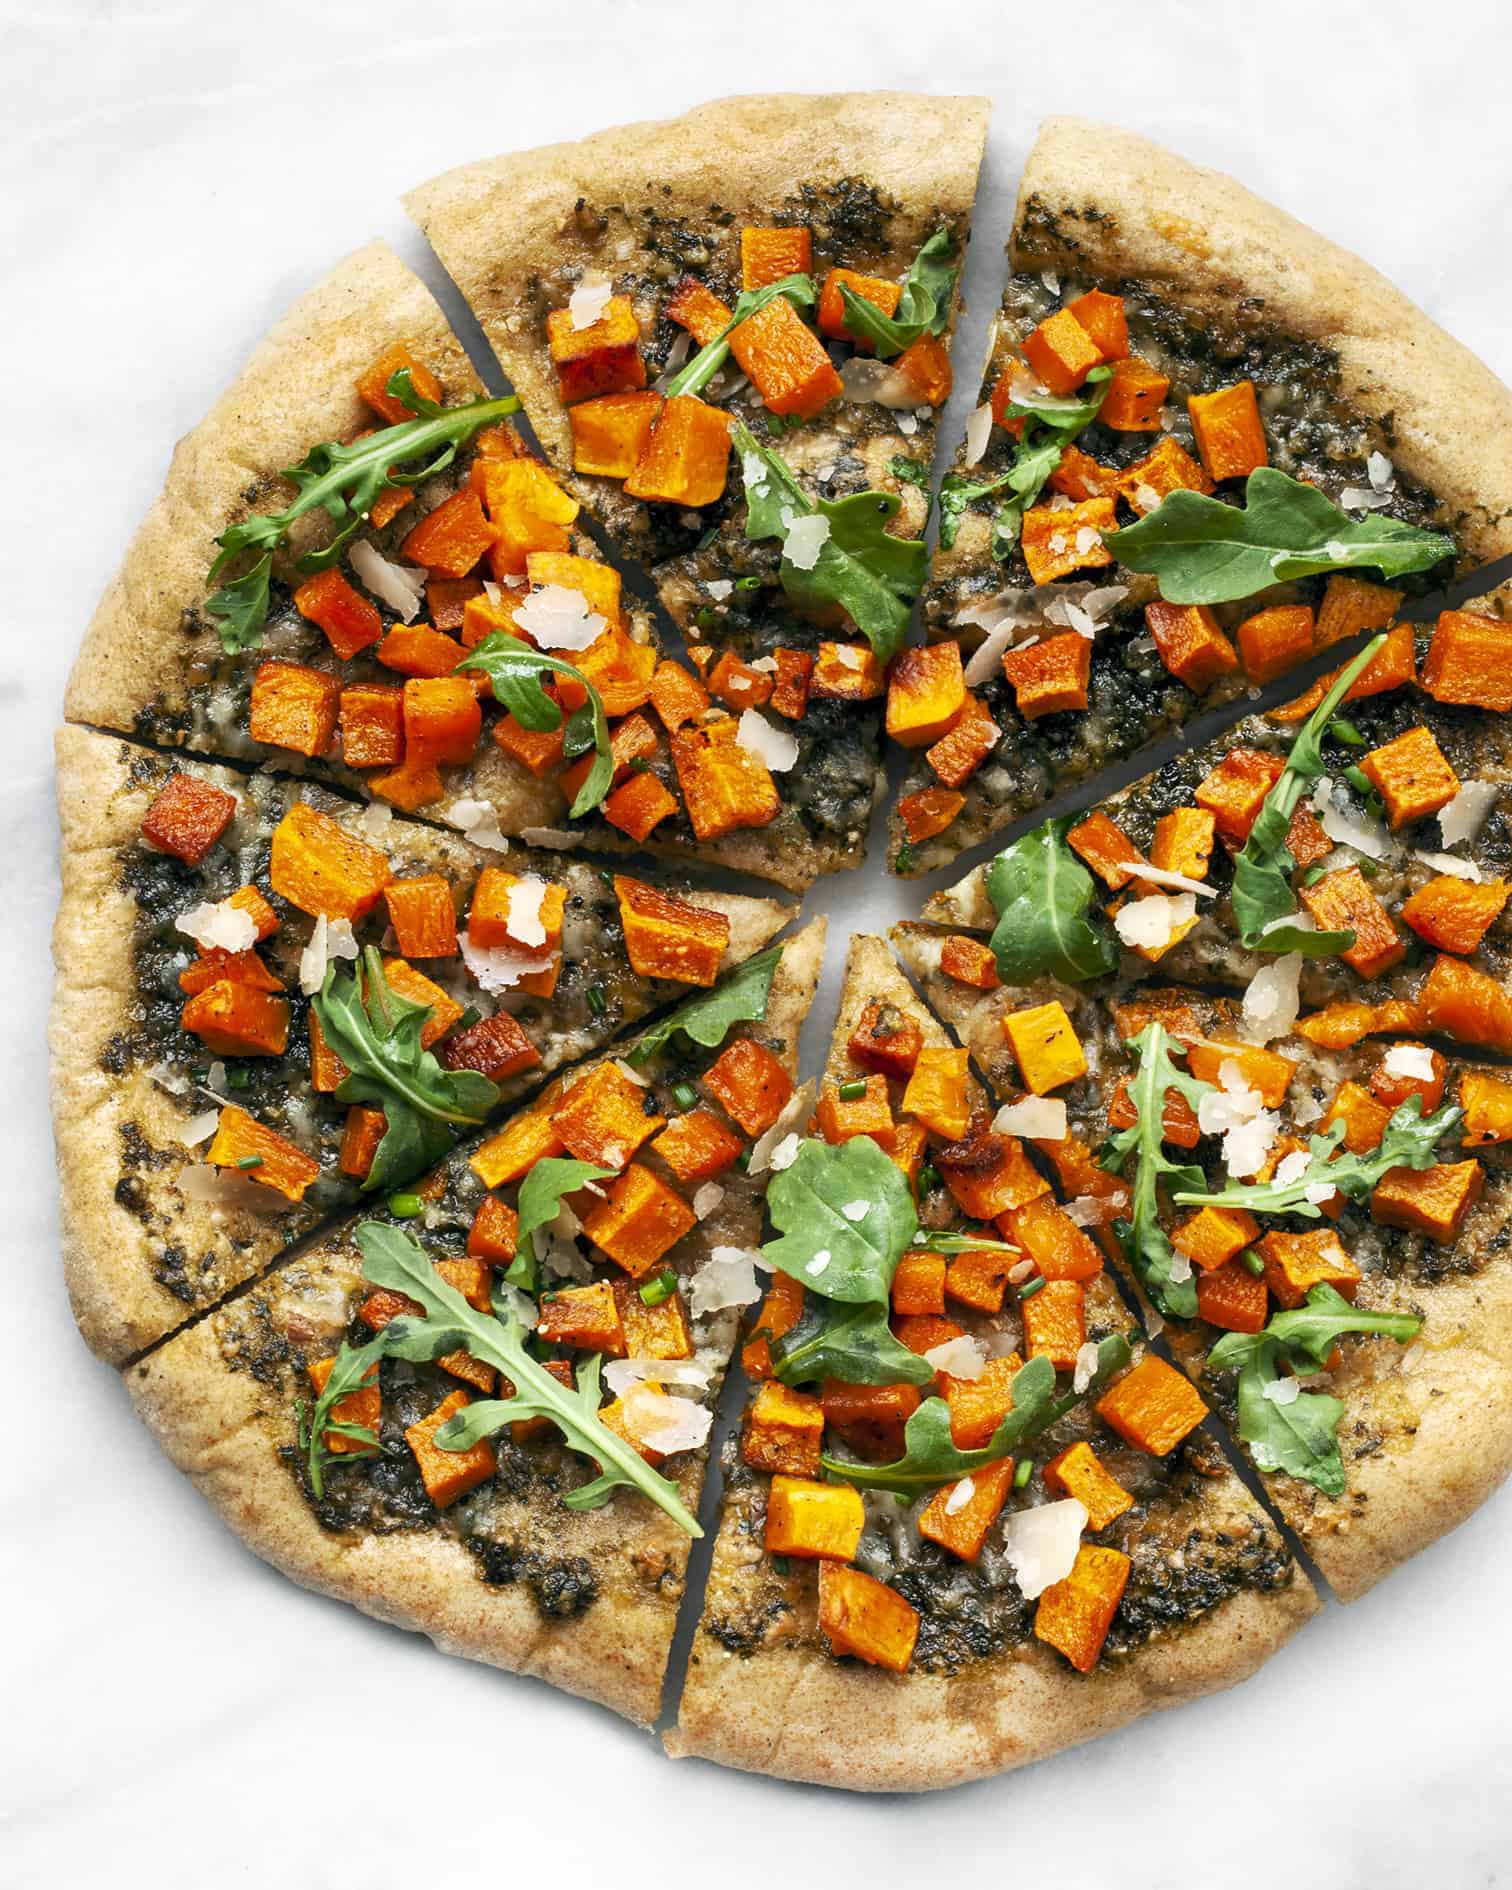 Roasted Butternut Squash Pizza with Arugula and Pesto